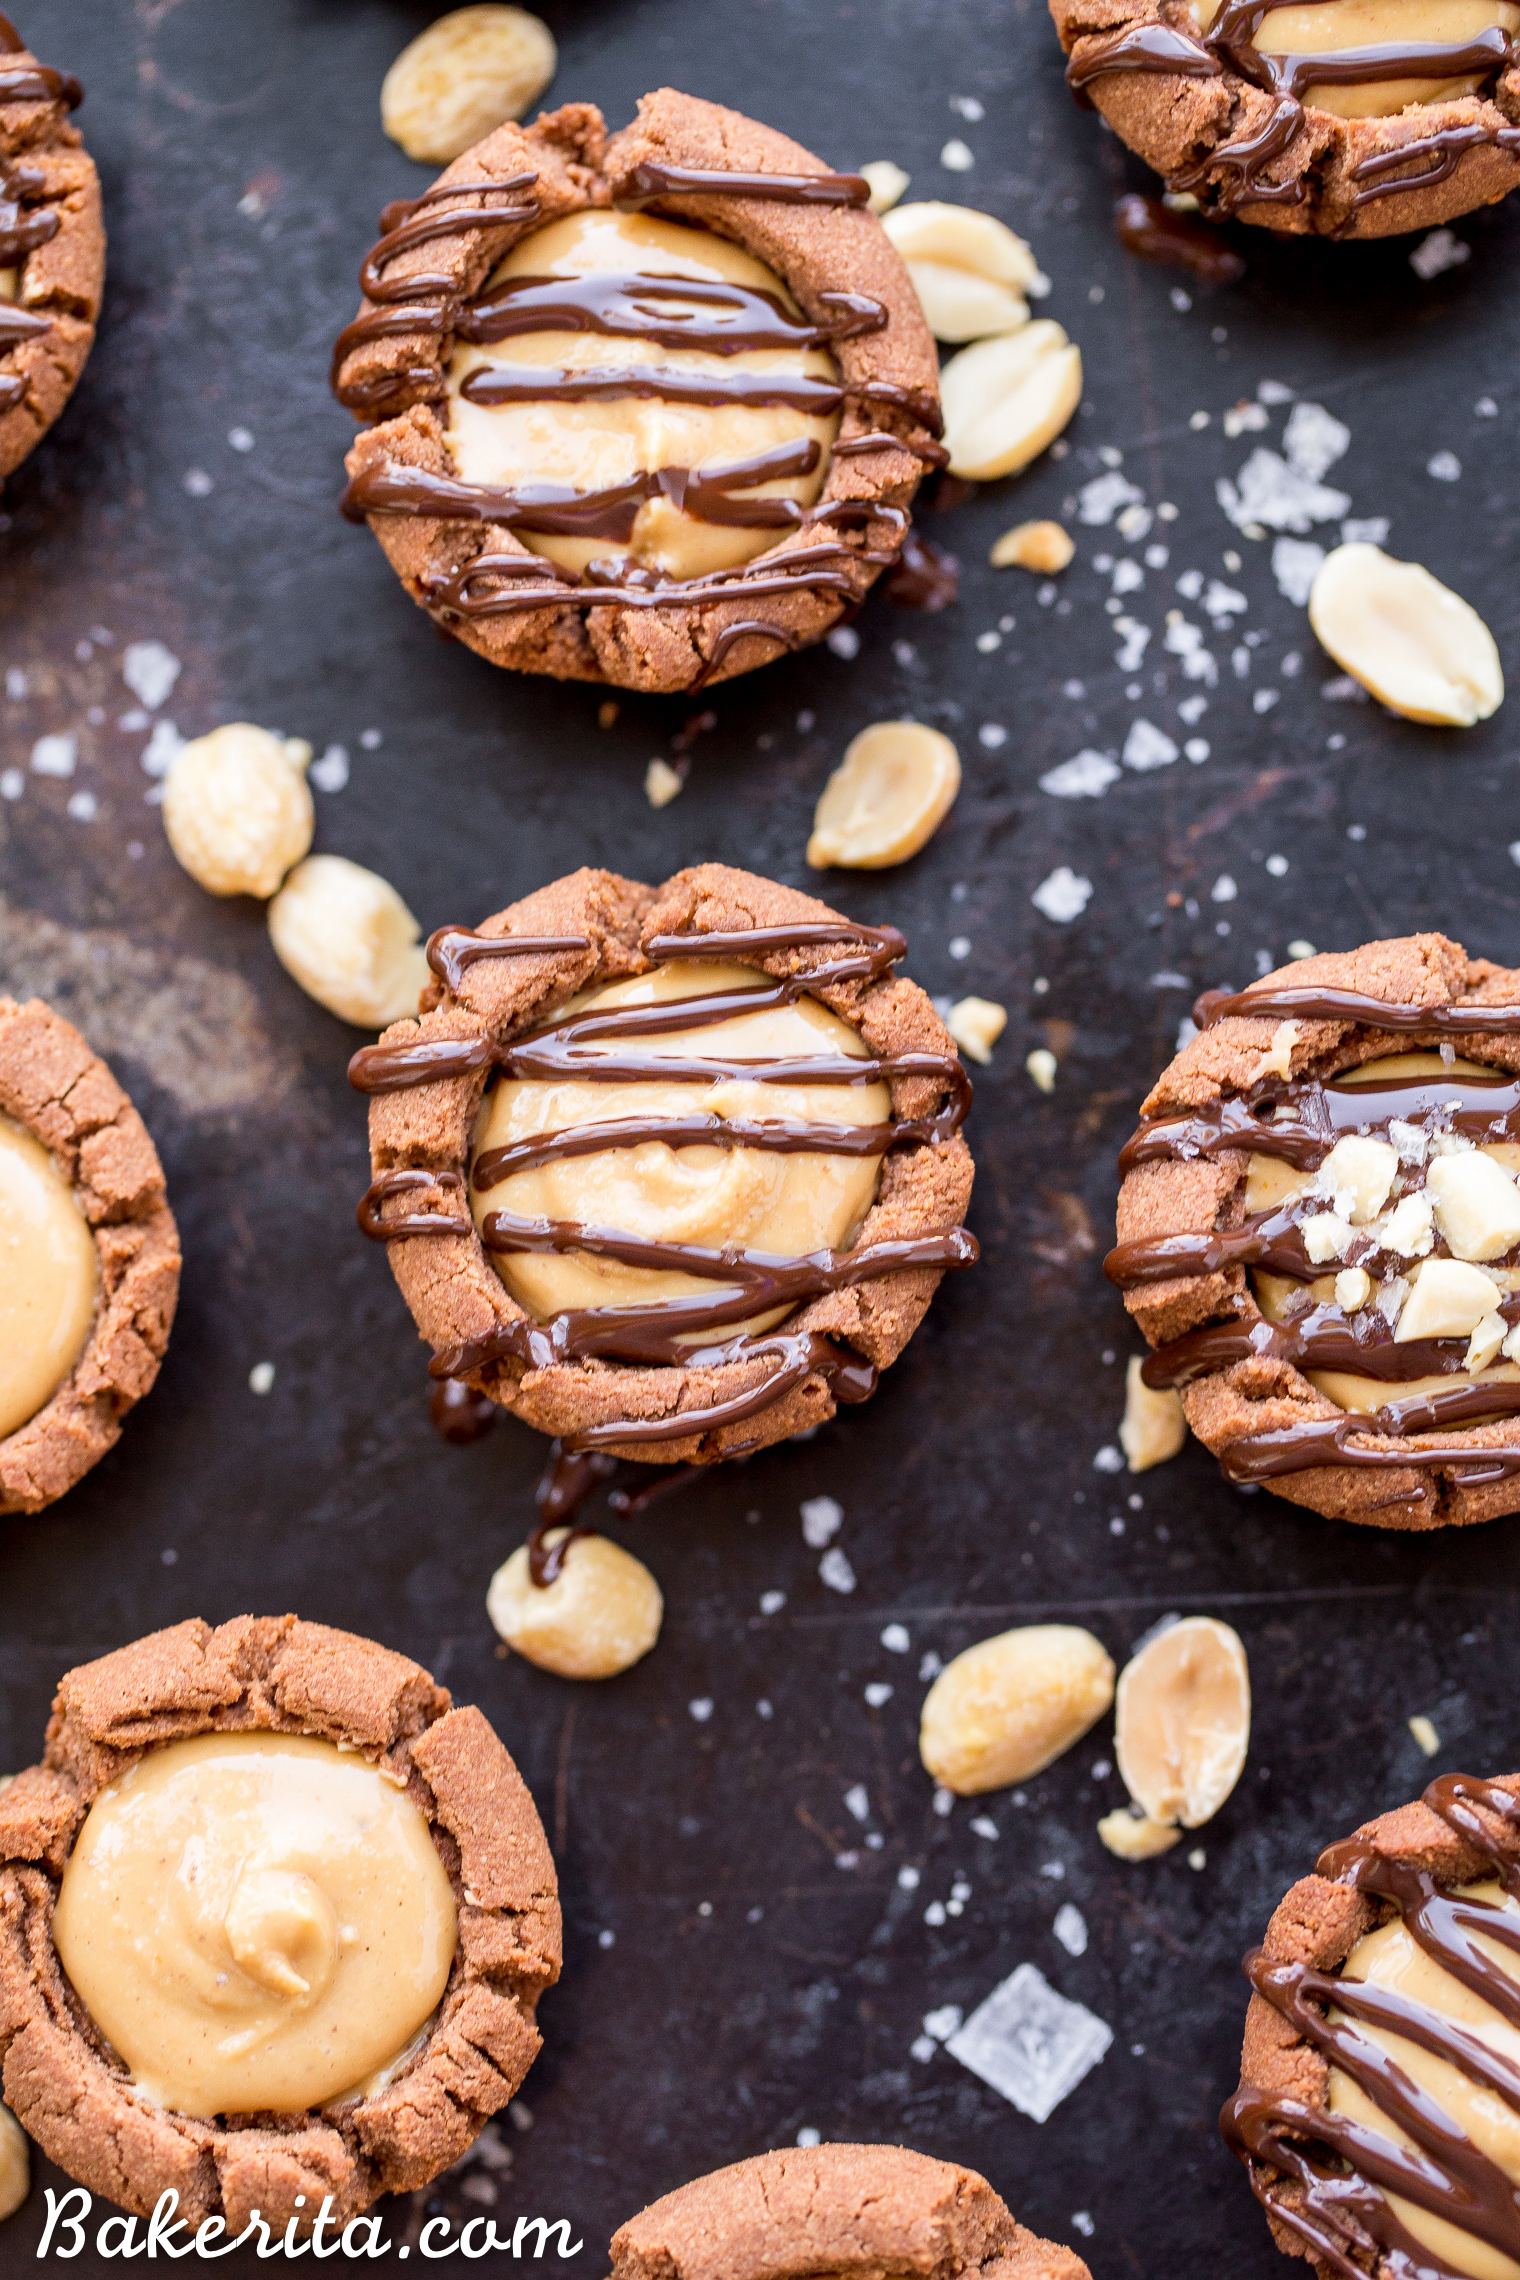 These Chocolate Peanut Butter Tartlets are sure to satisfy your sweet tooth! The chocolate shortbread crust is irresistibly crunchy, with a luscious peanut butter filling. You’d never guess these mini tarts are gluten free, grain free, refined sugar free, and vegan.